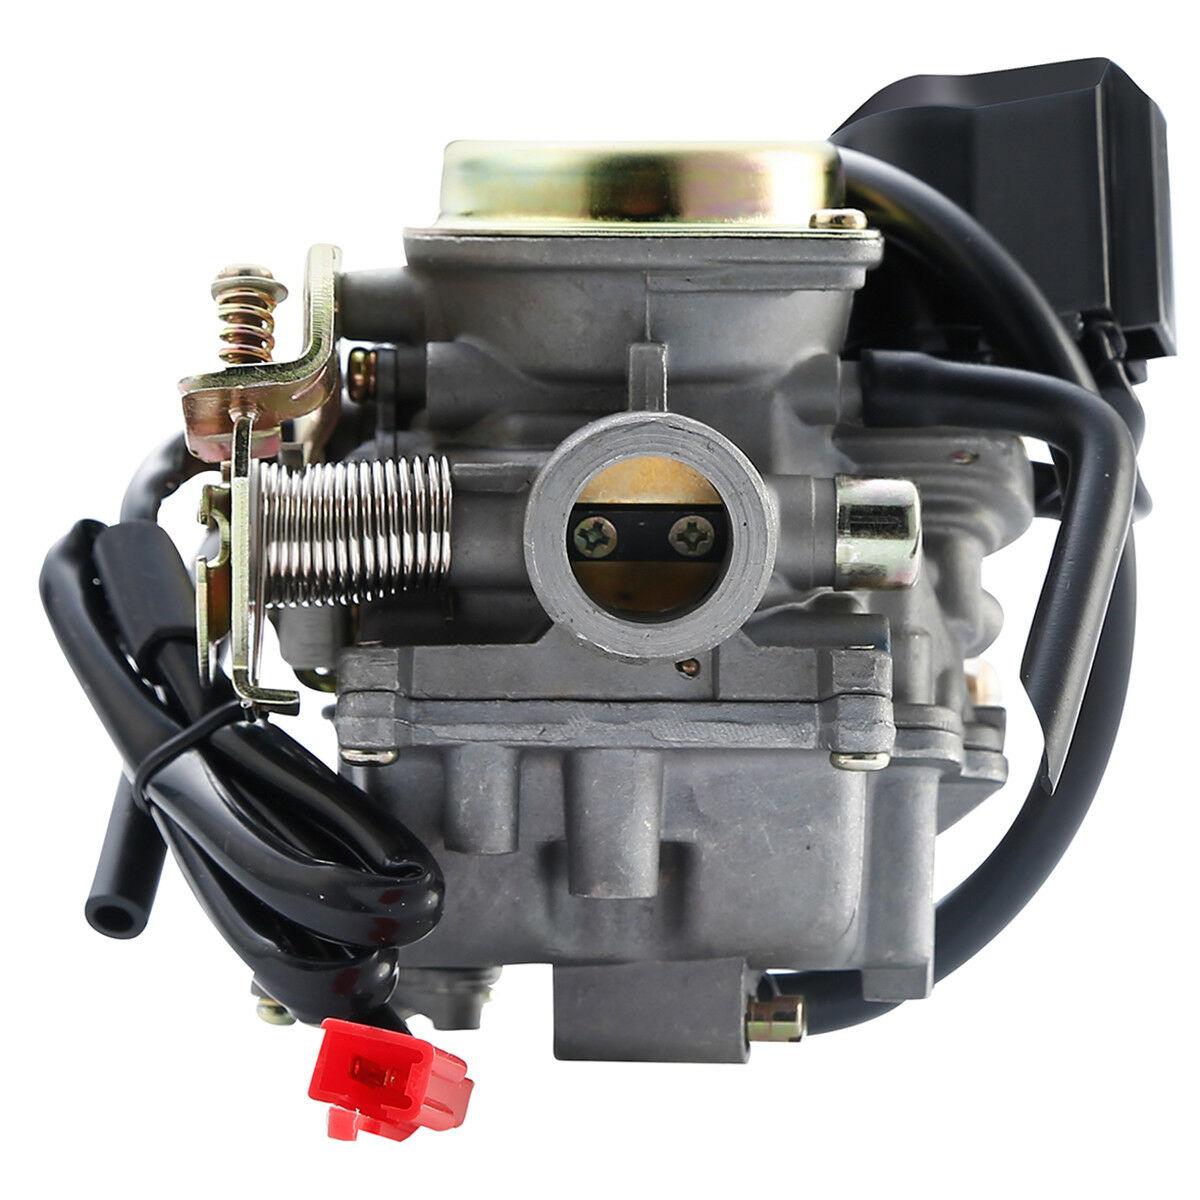 19mm 50cc SCOOTER Carb CARBURETOR~ 4 stroke chinese GY6 139QMB engine moped SUNL - Moto Life Products